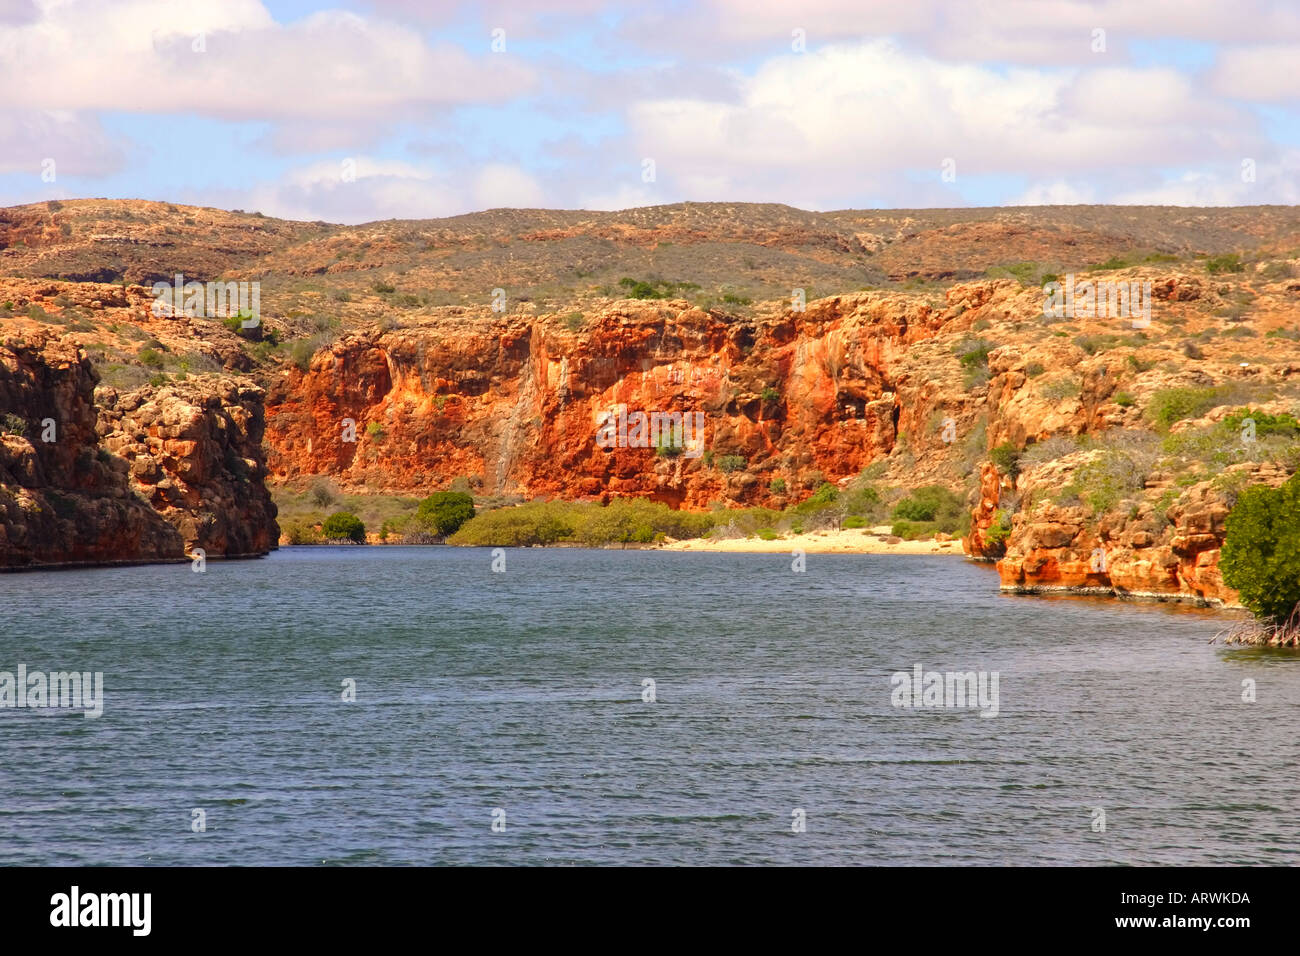 Red cliffs of Yardie Creek Gorge in Cape Range National Park near Exmouth Western Australia Stock Photo